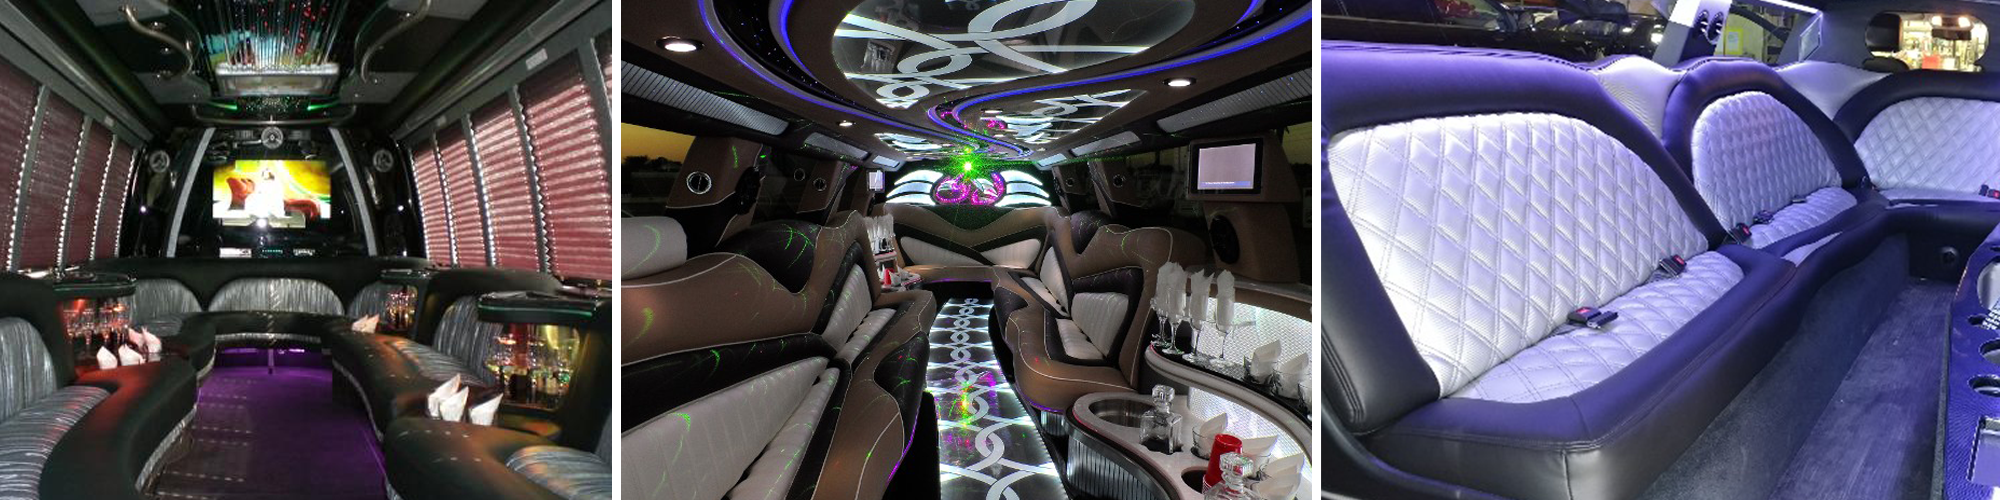 Inside of Limousines 